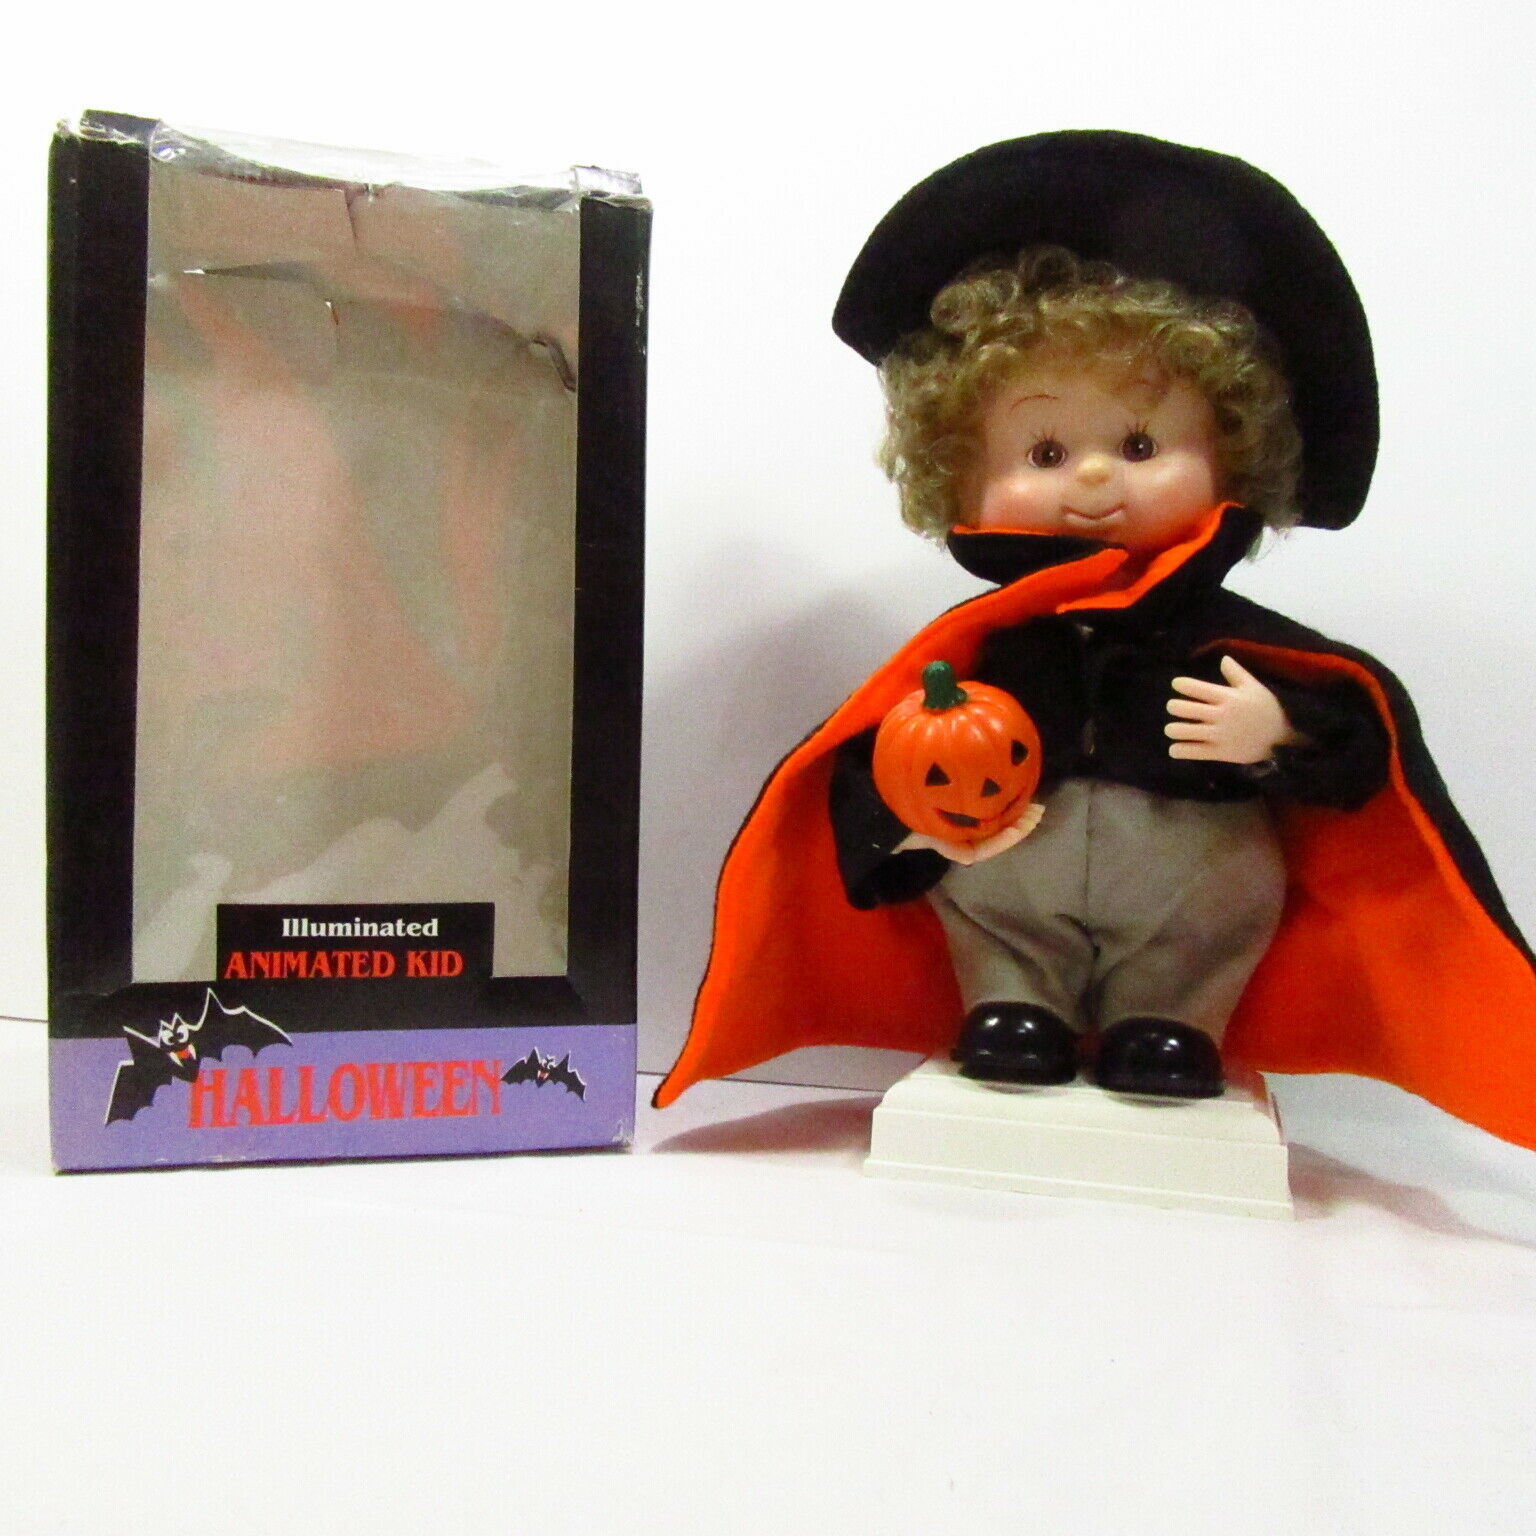 Primary image for The Original Motion-ettes of Halloween Animated Motionette Kid Dracula